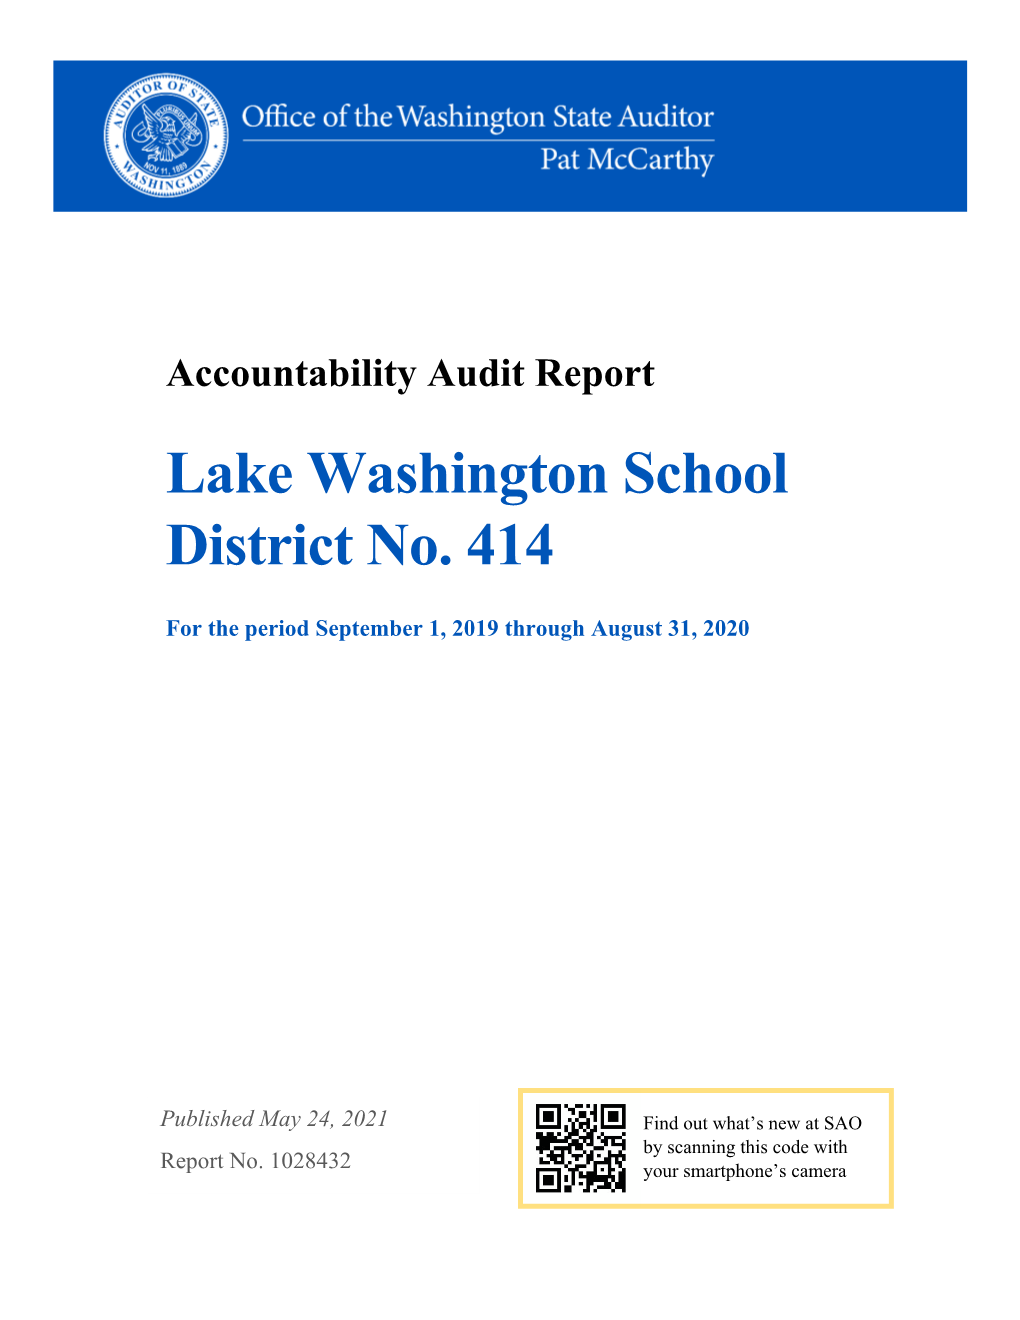 Accountability Audit Report